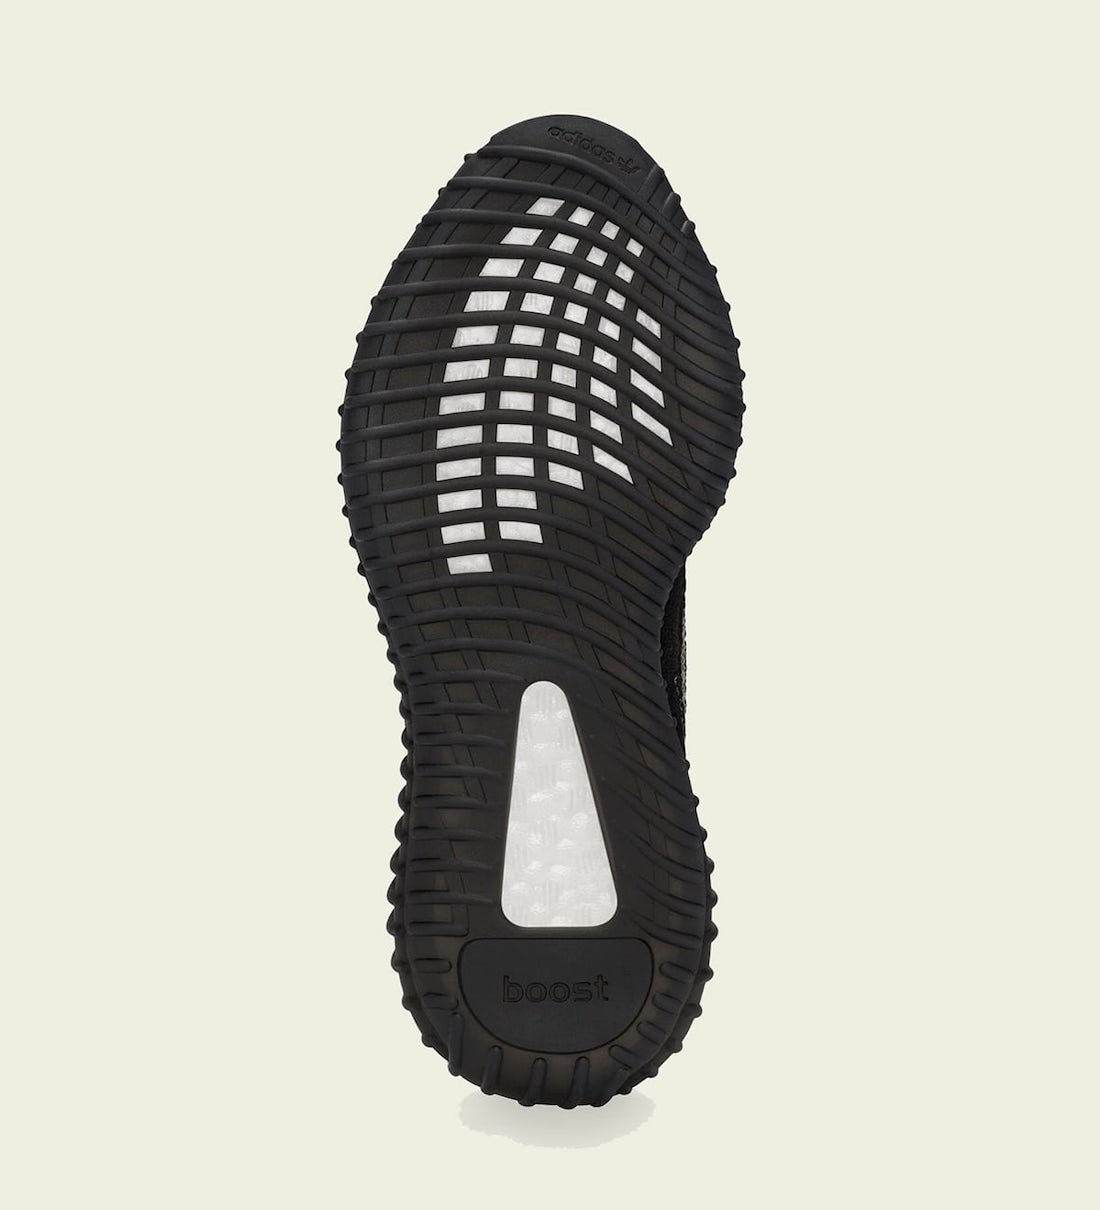 adidas Yeezy Boost 350 V2 MX Rock GW3774 Release Date Price